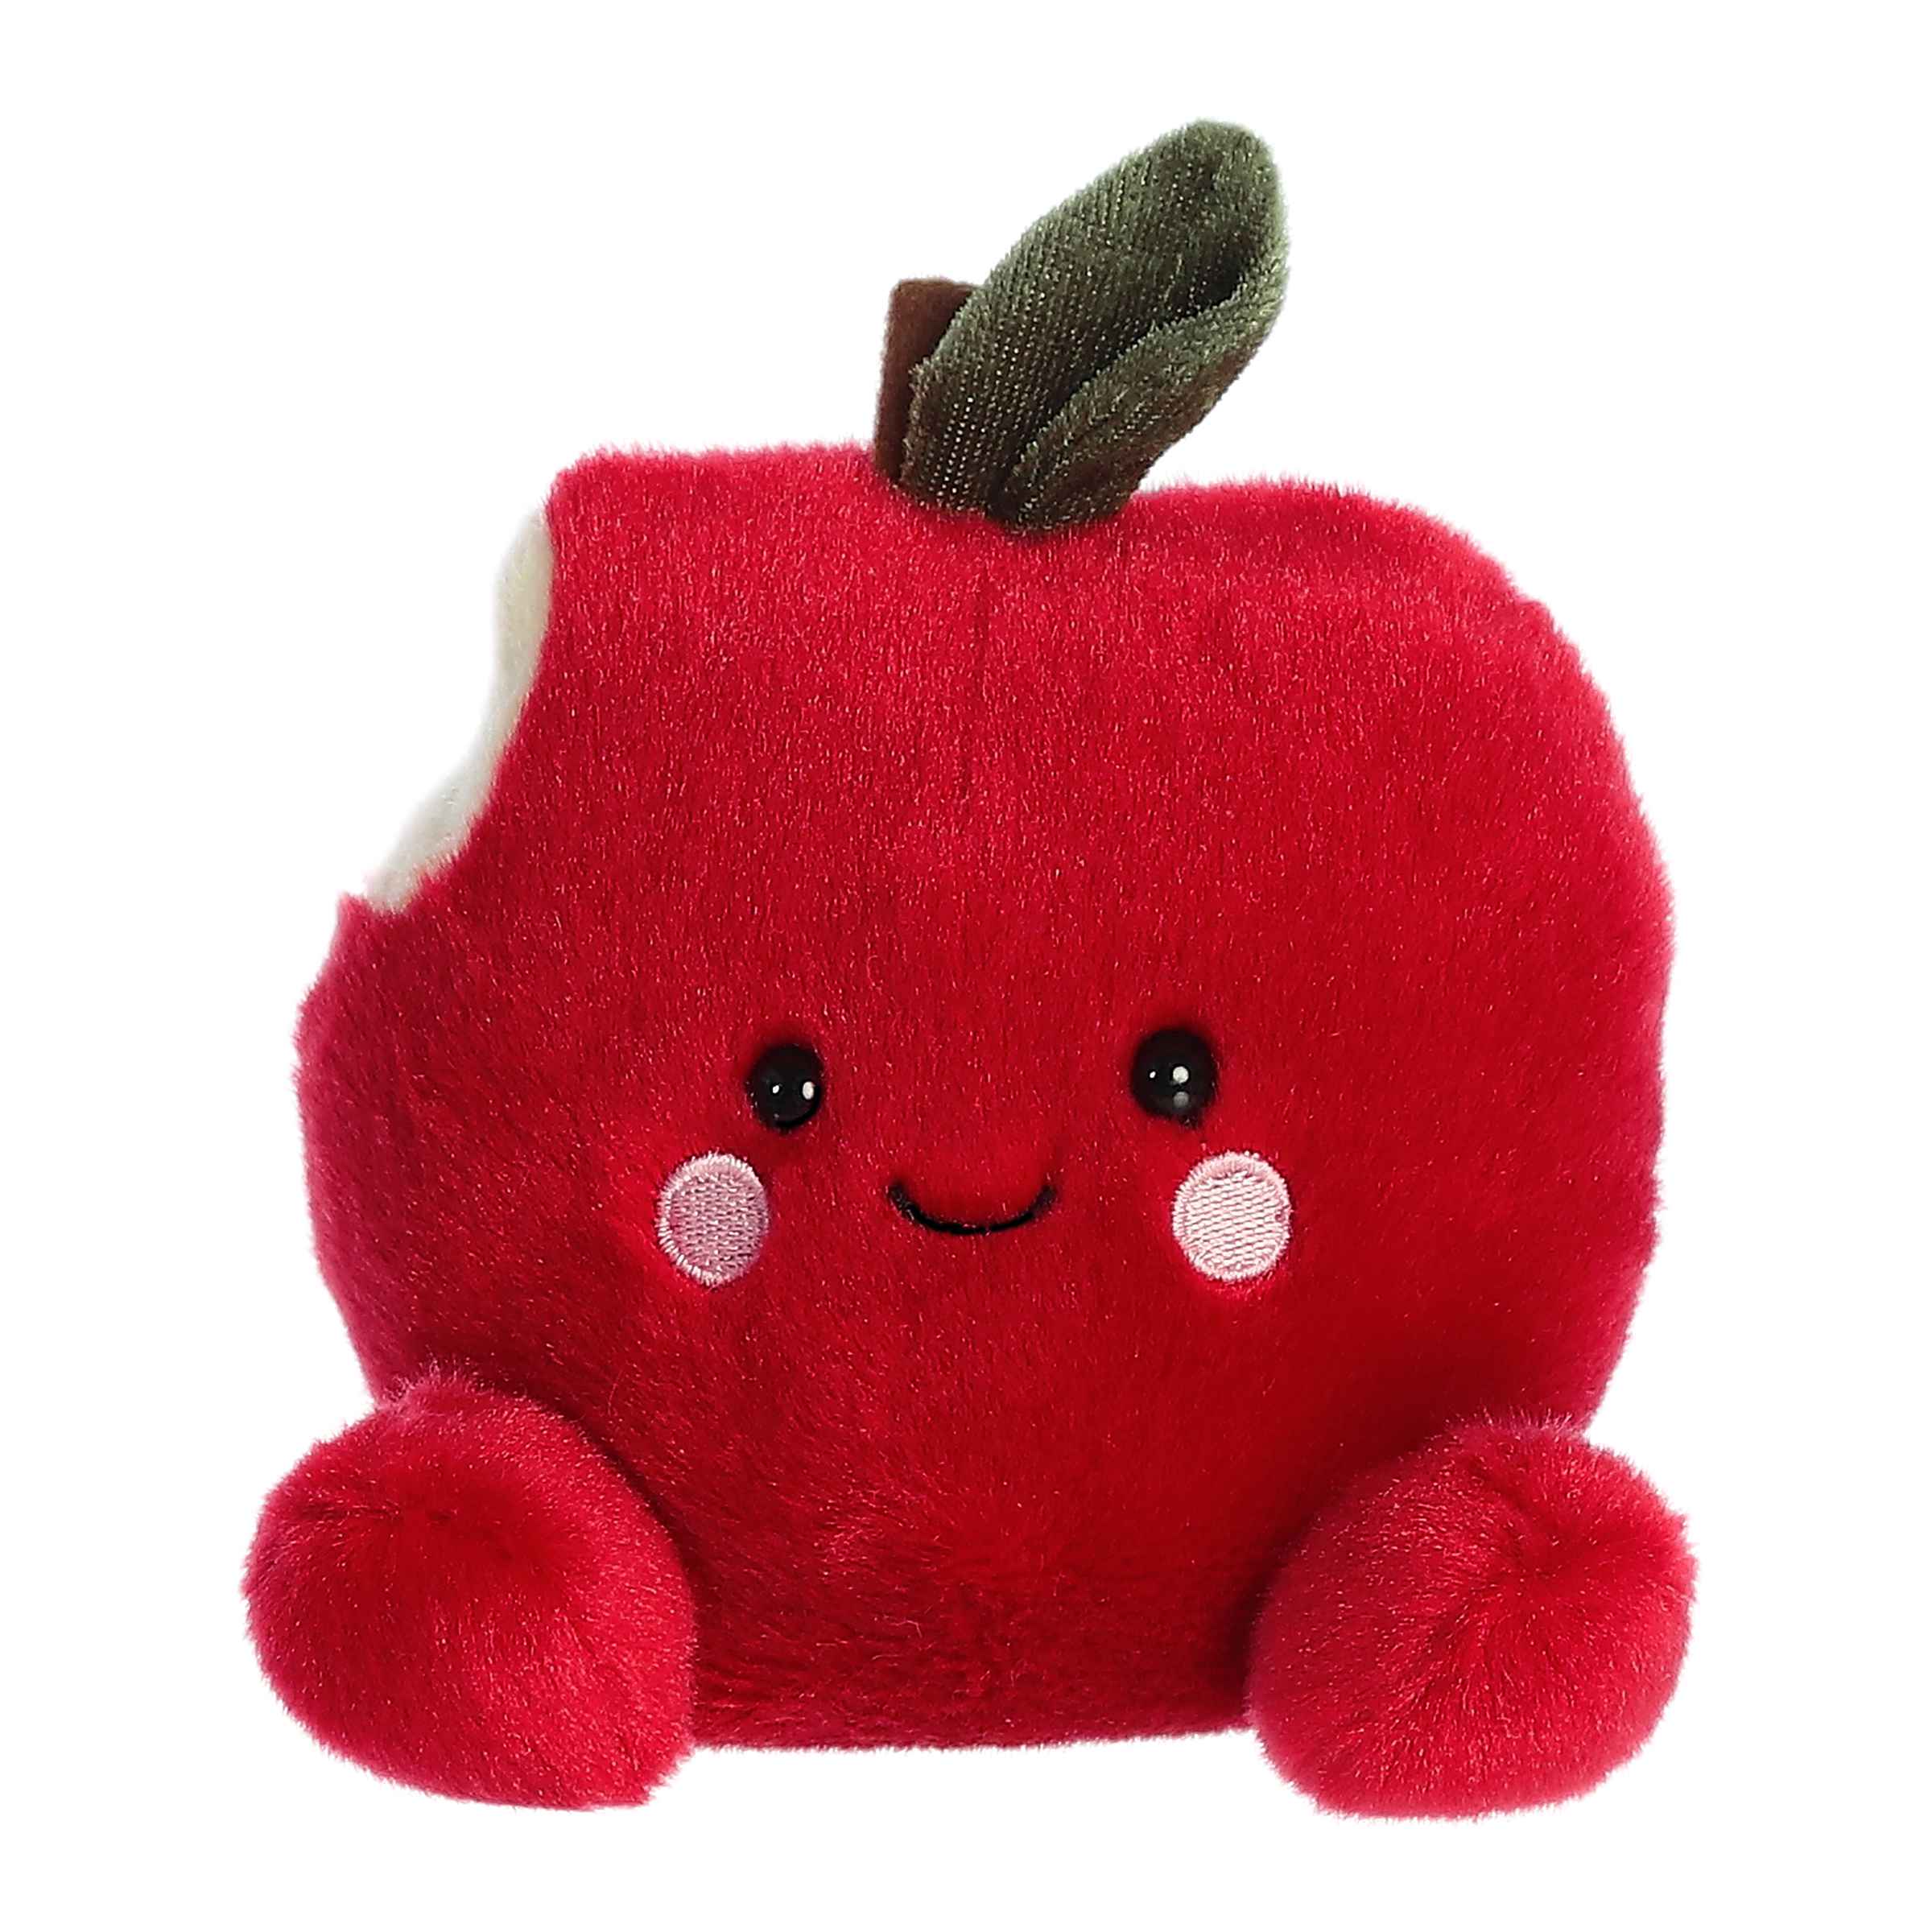 Crisp Red Apple plush from Palm Pals, bright red fruit plush with leaf and blush, stylish